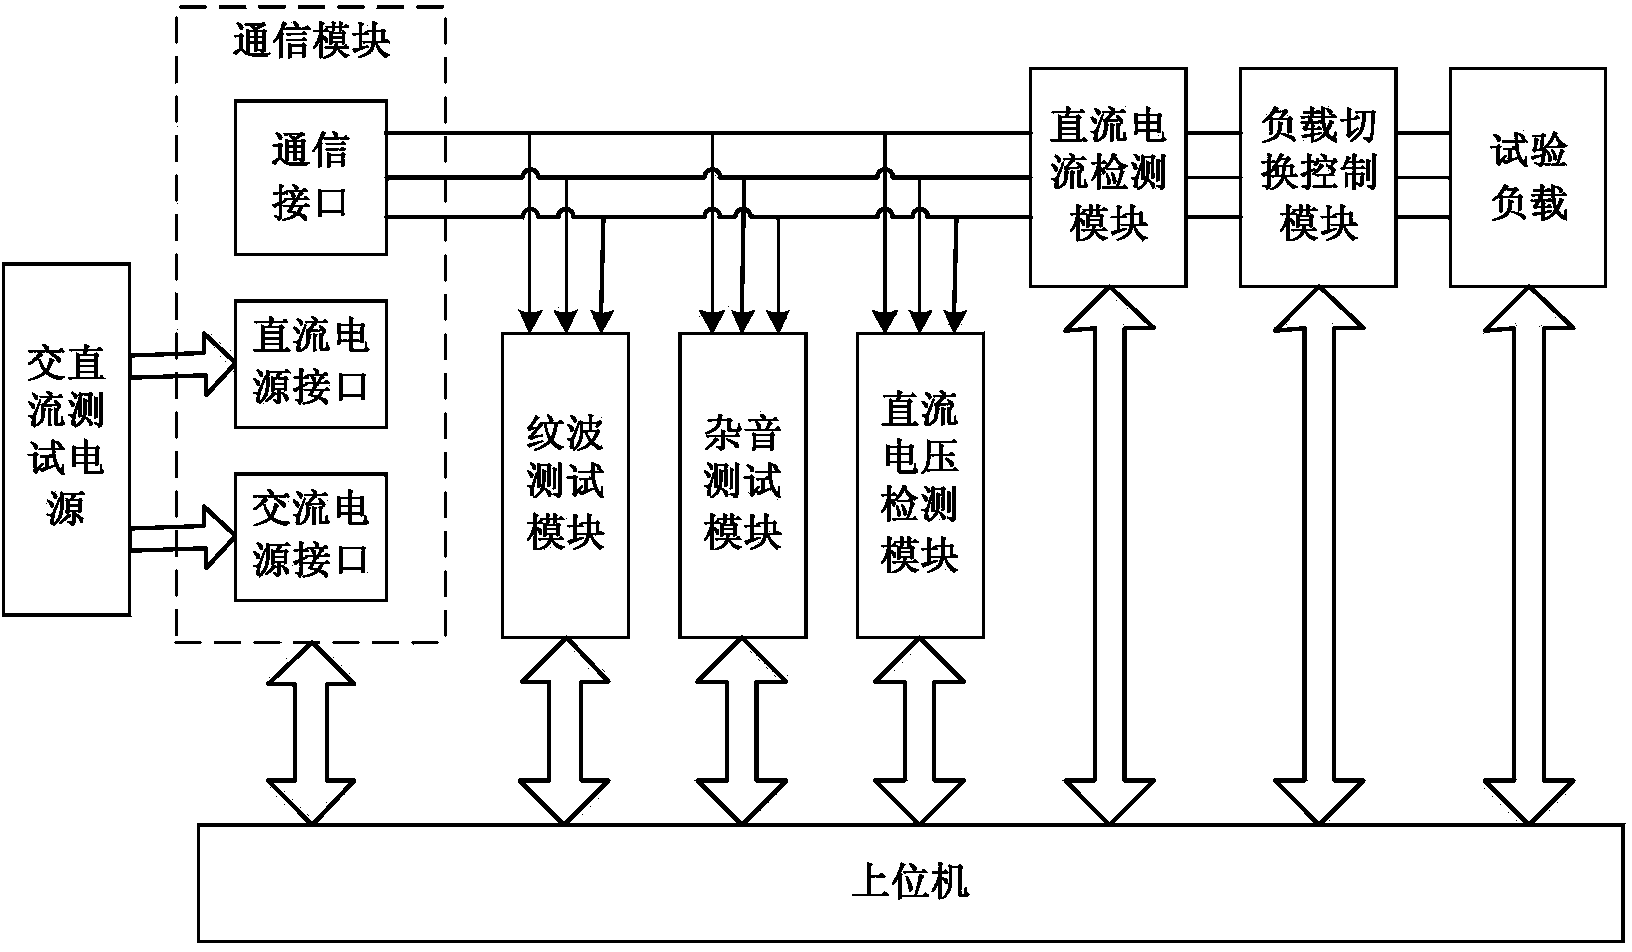 Collection terminal communication interface load capacity test system